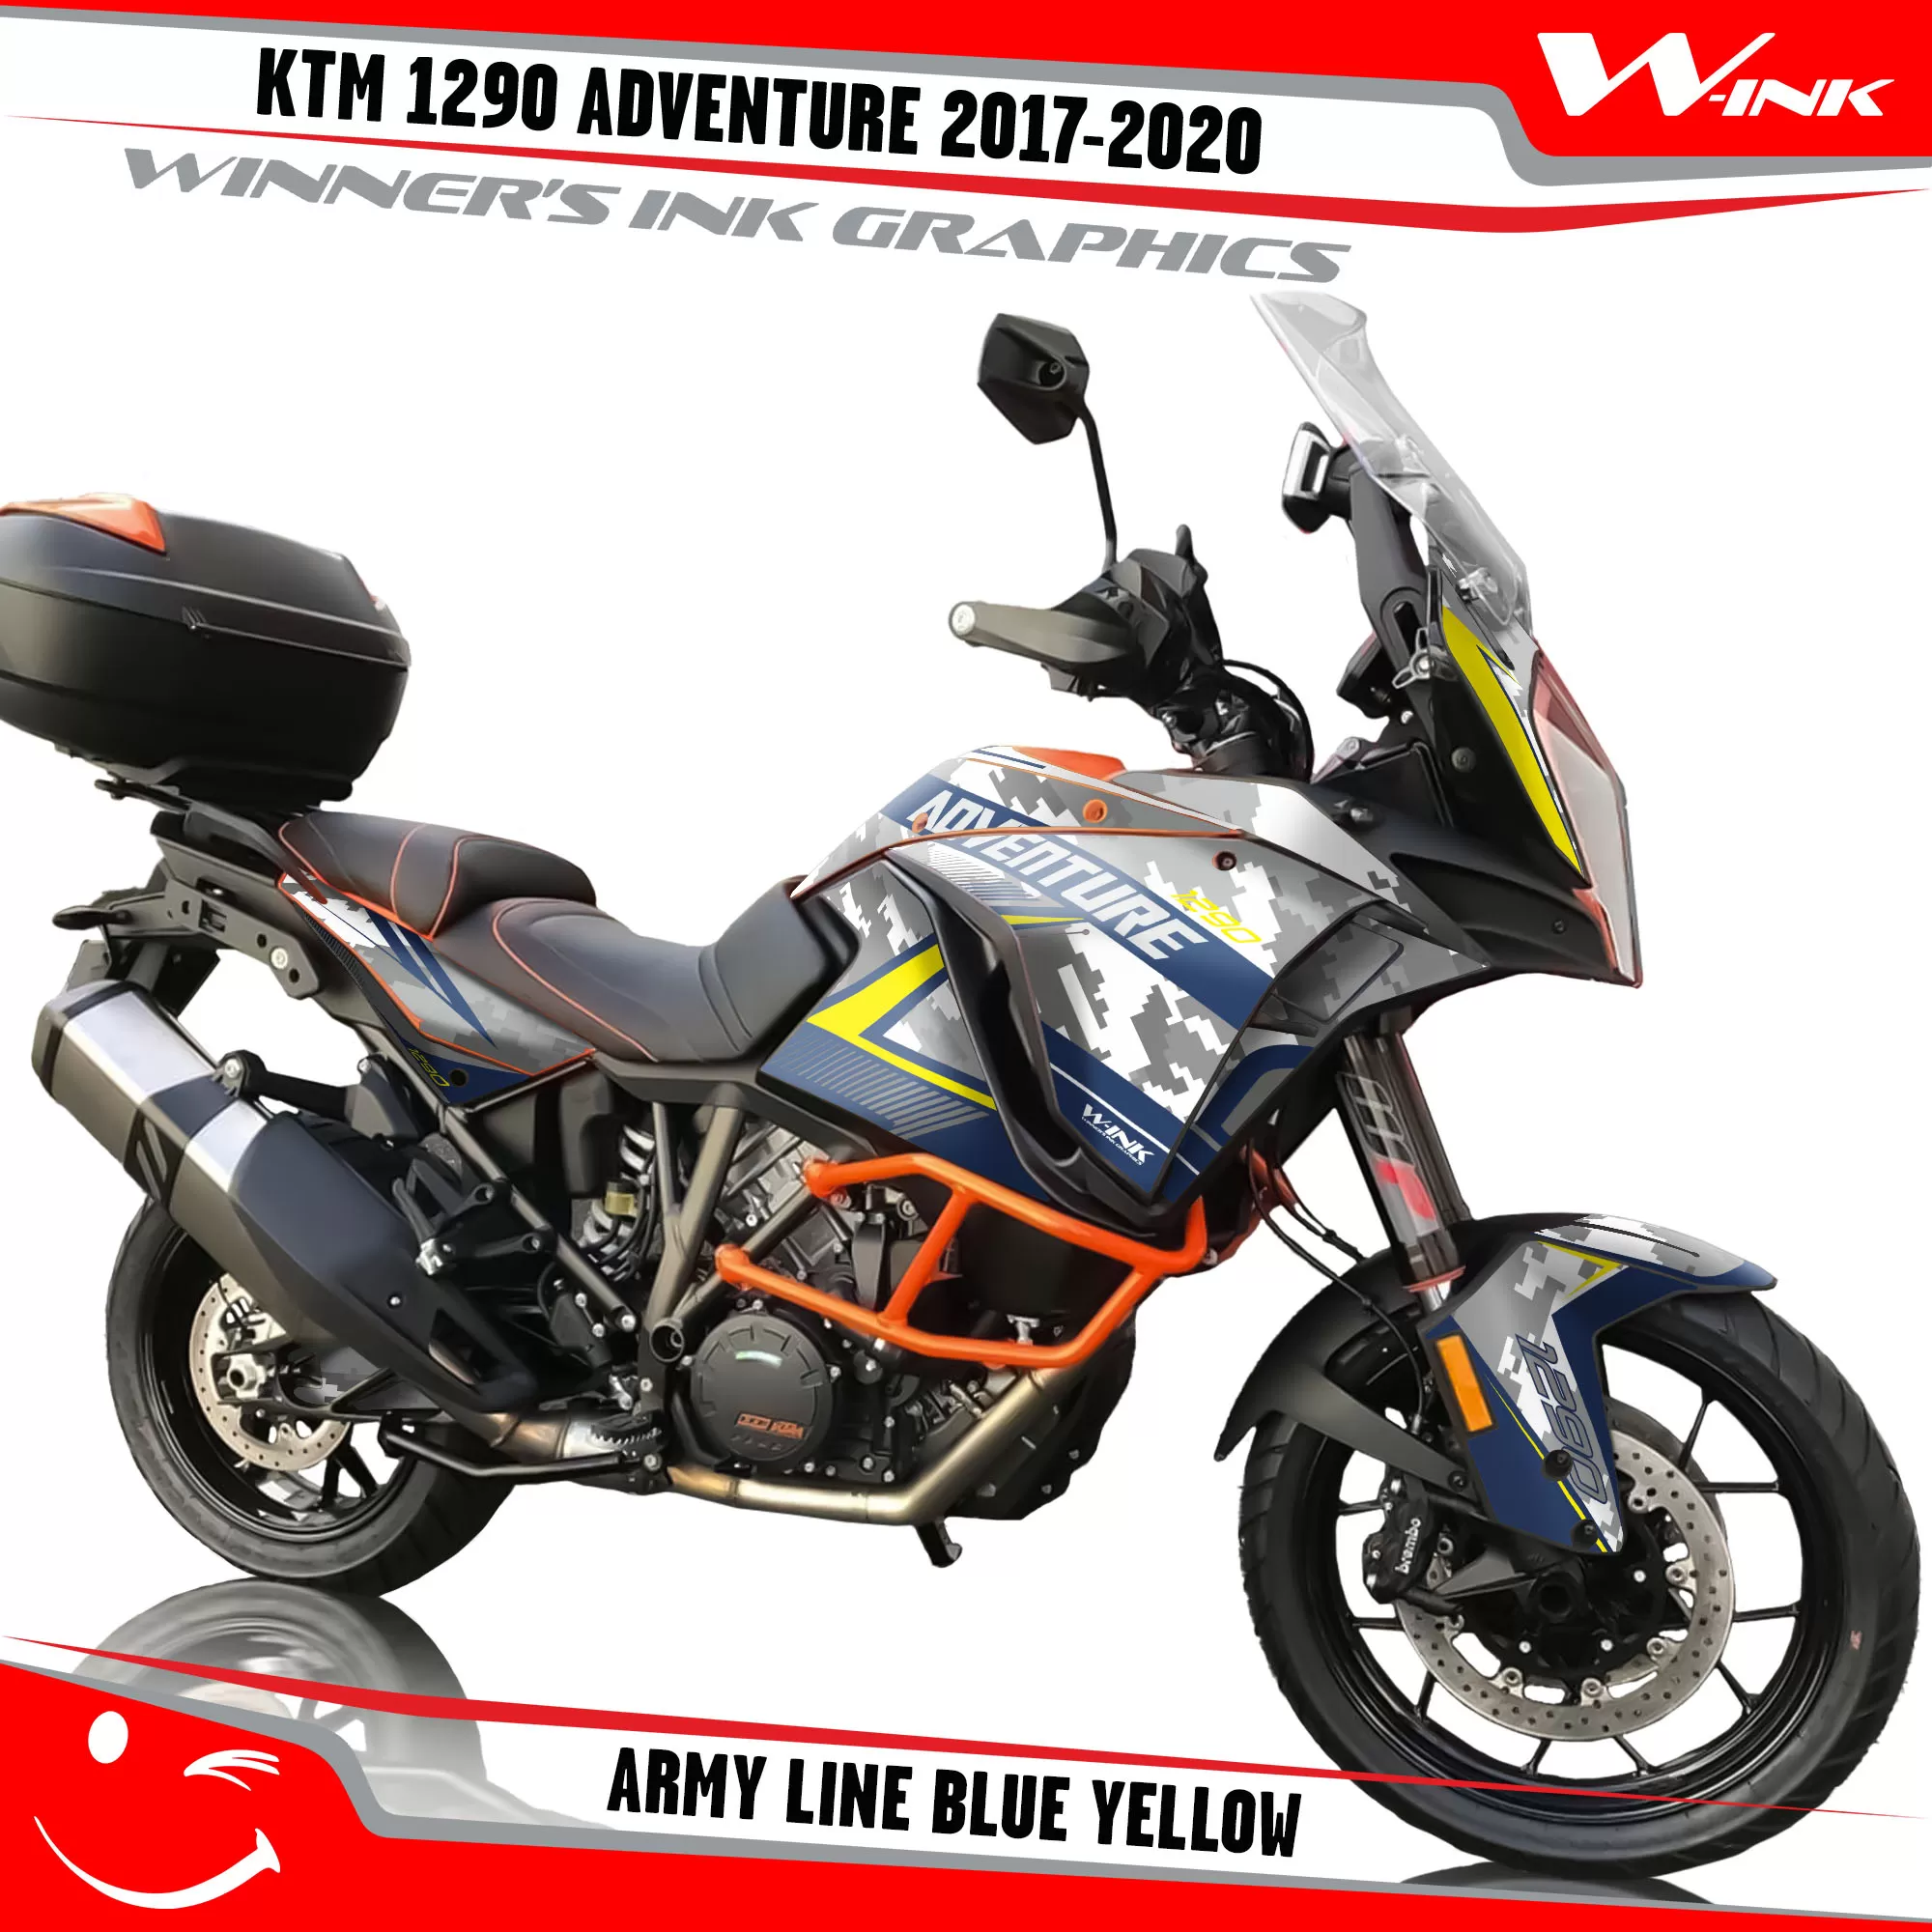 KTM-Adventure-1290-2017-2018-2019-2020-graphics-kit-and-decals-Army-Line-Blue-Yellow